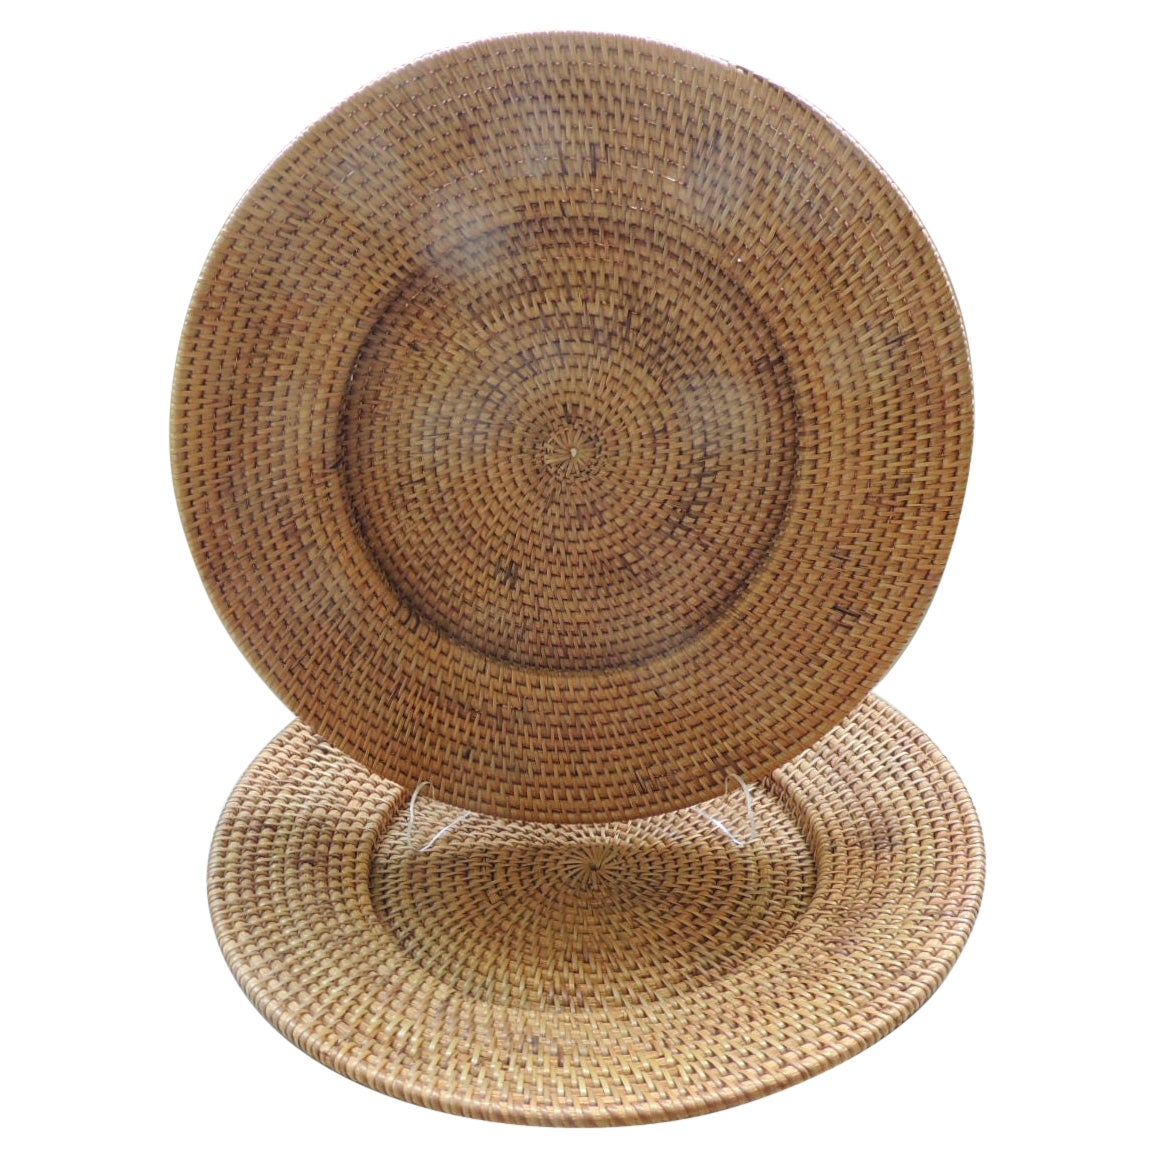 Set of '6' Large Deep Dish Rattan Woven Plate Chargers